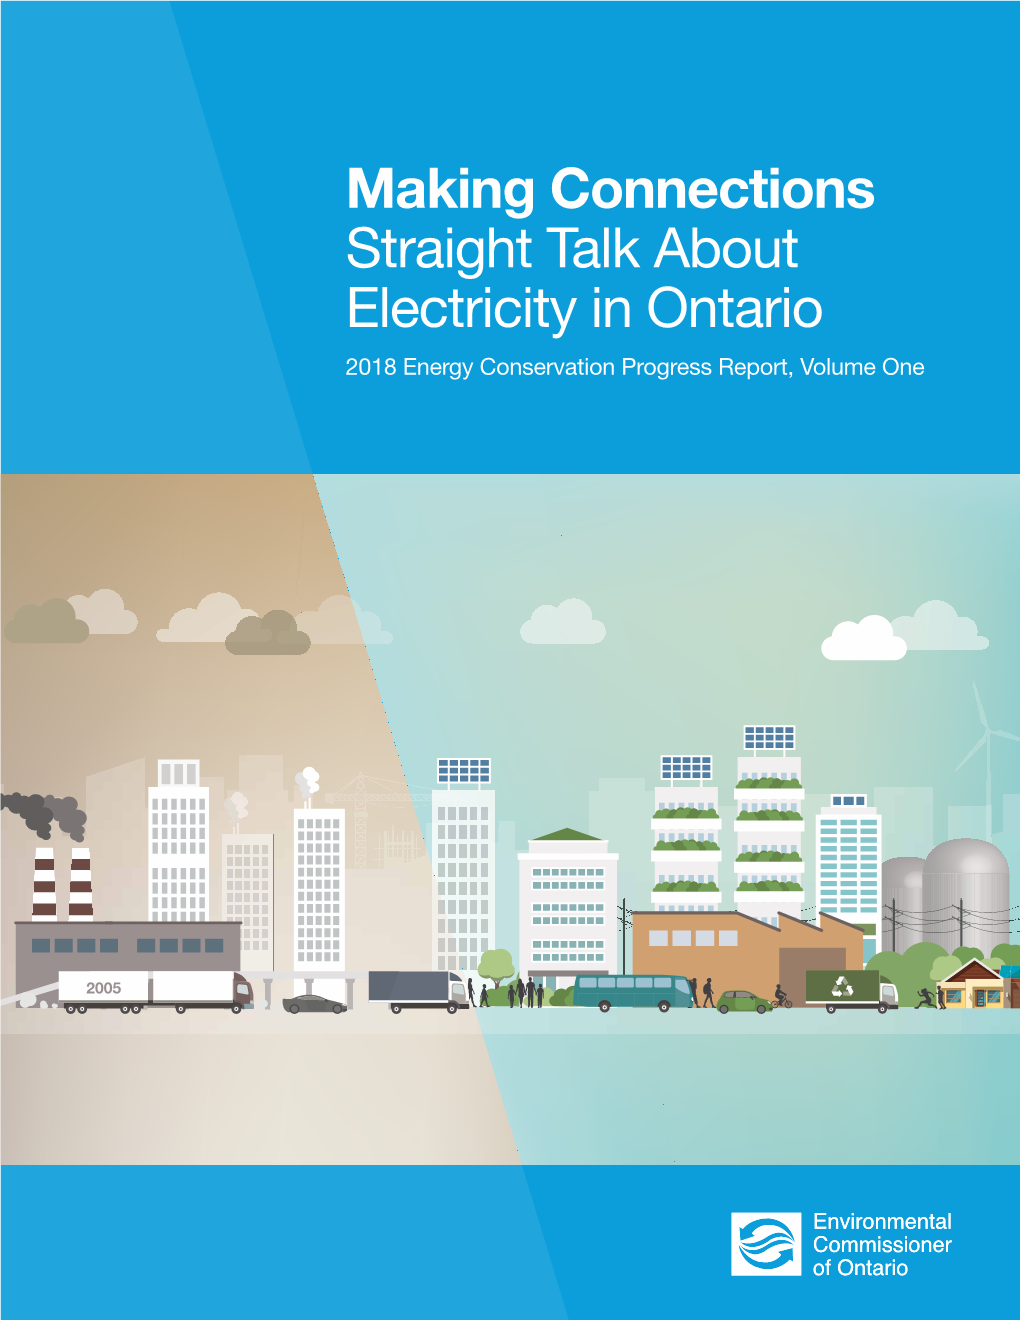 Making Connections Straight Talk About Electricity in Ontario